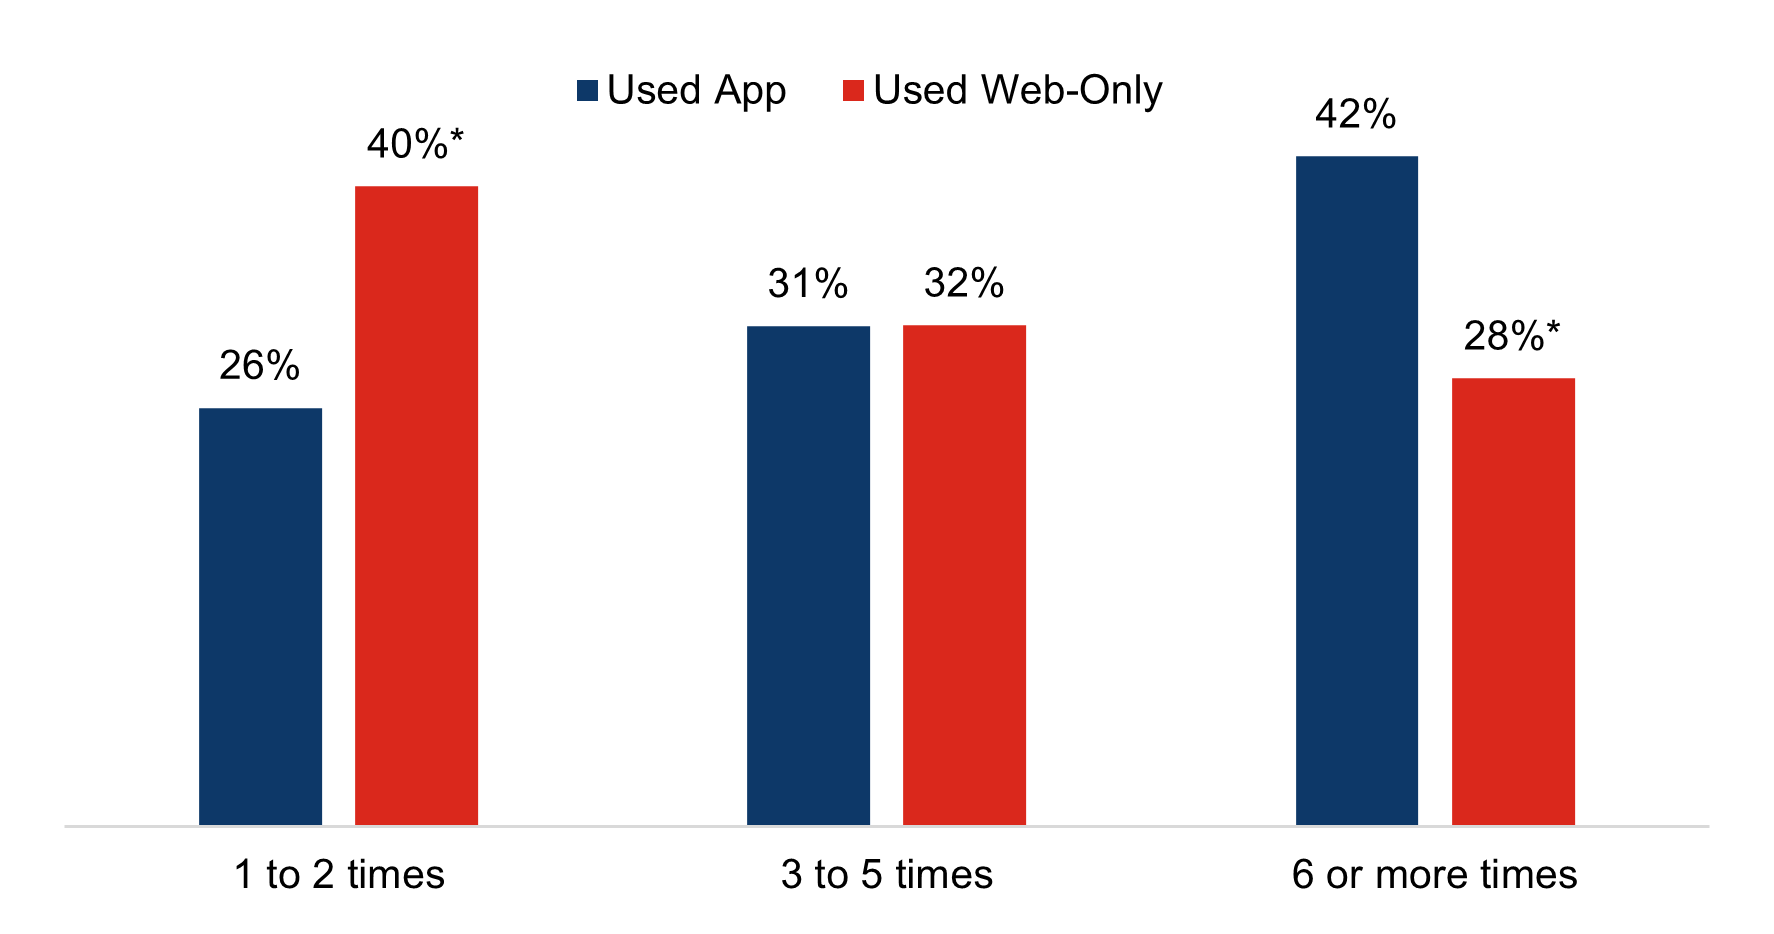 The figure shows a bar chart displaying the percent of individuals using an app versus using the web-only to access their online medical records or patient portal at different levels of frequency in 2022, among those who reported accessing their online medical record or patient portal at least once within the prior year. Values for the y-axis range from 0-100 percent and represent the percent of individuals reporting each level of frequency of online records access, and the y-axis displays three categories of levels of frequency of access (1 to 2 times, 3 to 5 times, and 6 or more times). For each category of access frequency, the chart displays two bars, one representing the percent of individuals reporting the respective level of access among those that used an app to access their records, and the other representing the percent of individuals reporting that level of access among those that used only the web for this purpose. The chart shows that, among those that used an app, 26 percent reported accessing their online medical records 1 to 2 times, 31 percent accessed their online medical records 3 to 5 times, and 42 percent accessed them 6 or more times. Among those that reported using only the web to access their online medical records, 40 percent reported accessing their online medical records 1 to 2 times (a statistically significantly greater percent of individuals than those that used an app), 32 percent accessed them 3 to 5 times, and 28 percent reported accessing them 6 or more times (a statistically significantly smaller percent of individuals than those that used an app).